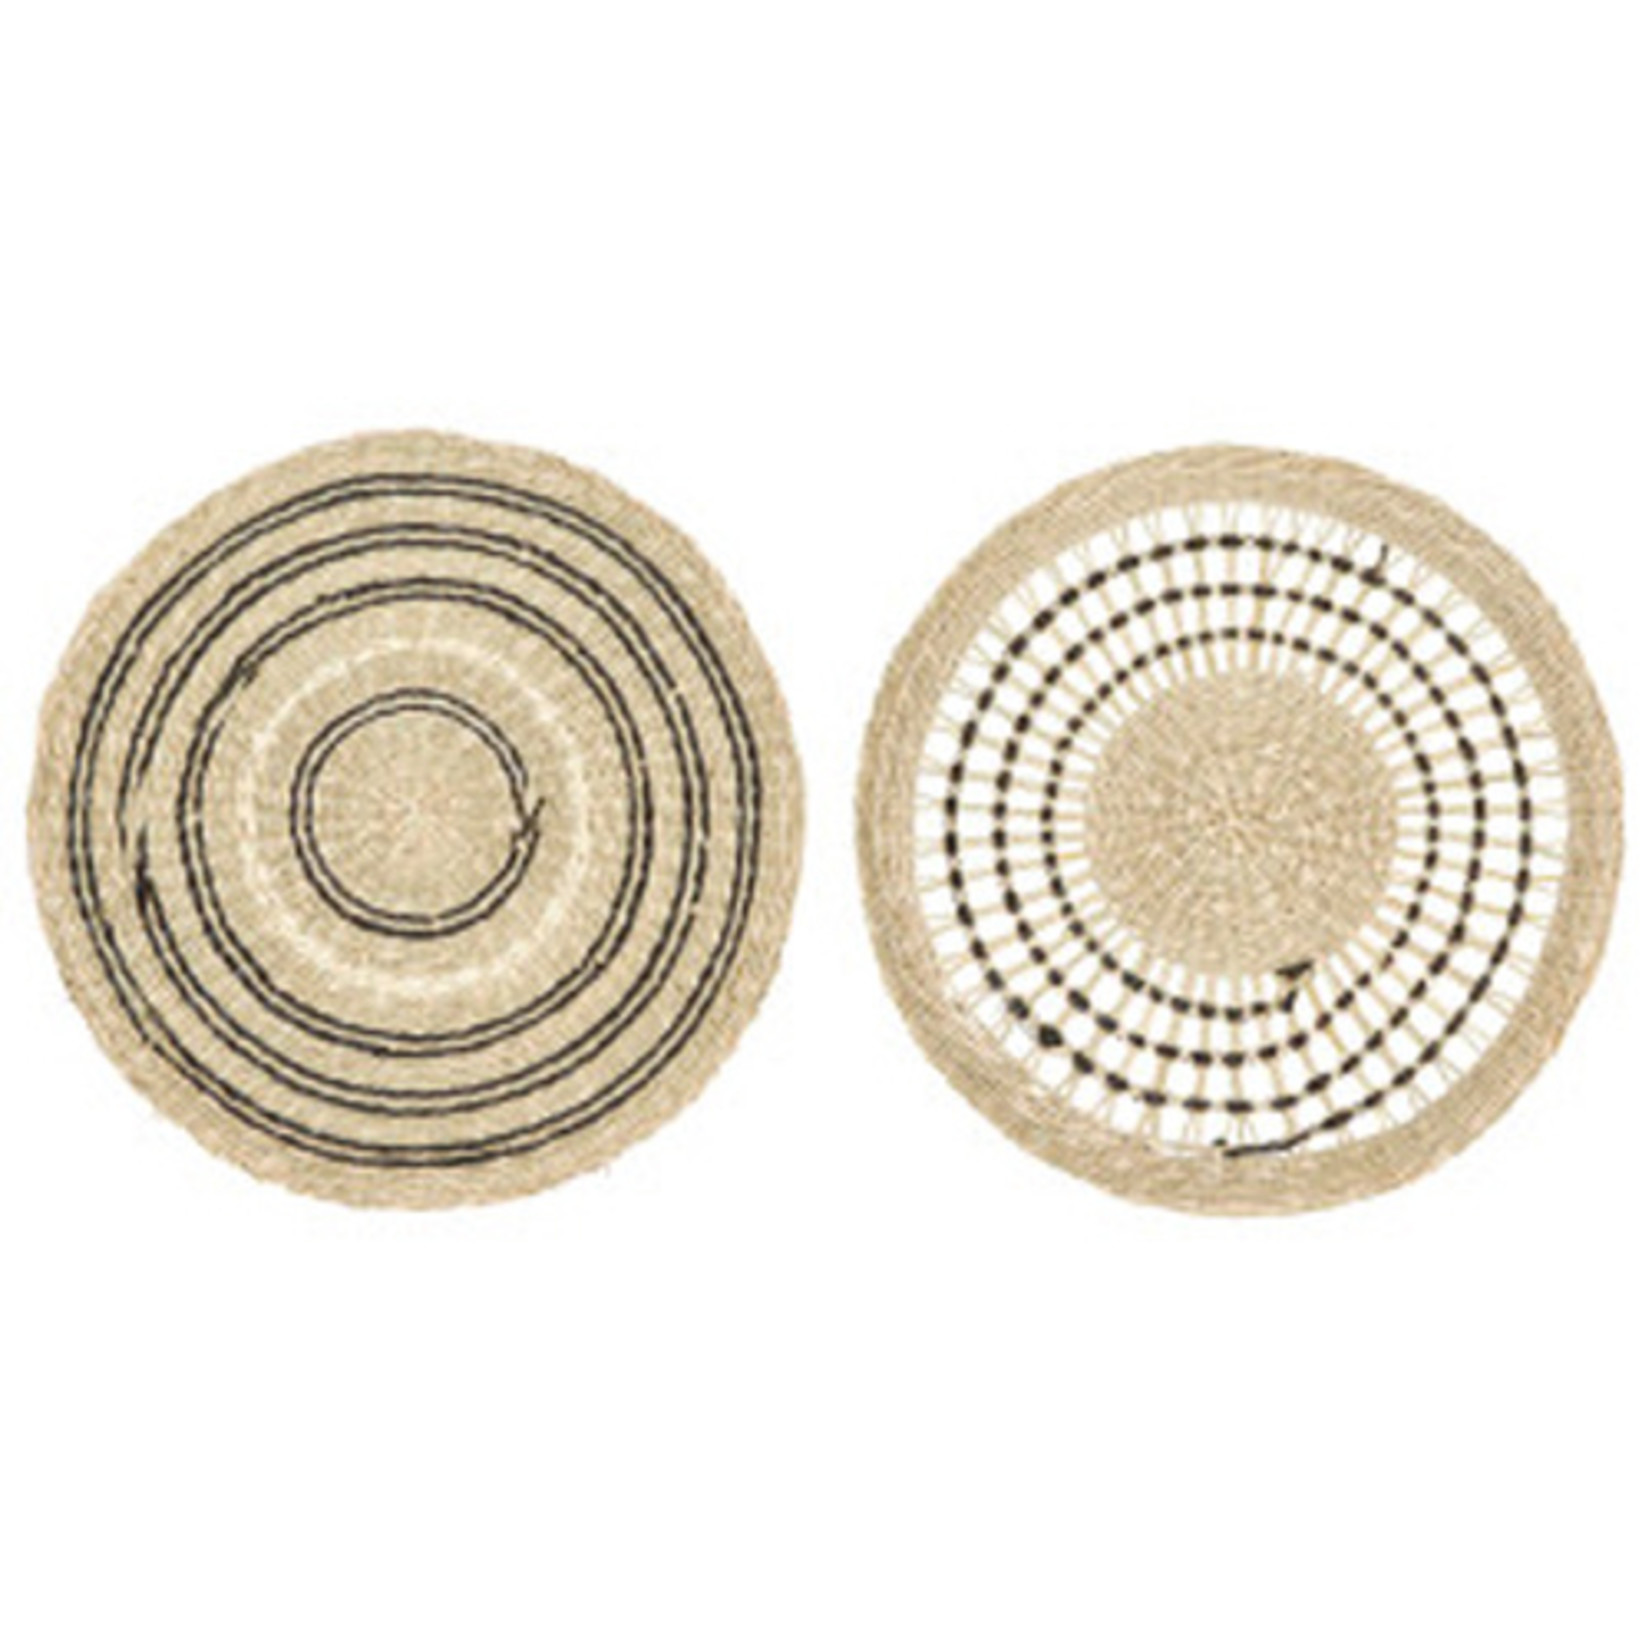 Creative Coop Round Hand-woven Seagrass Placemat